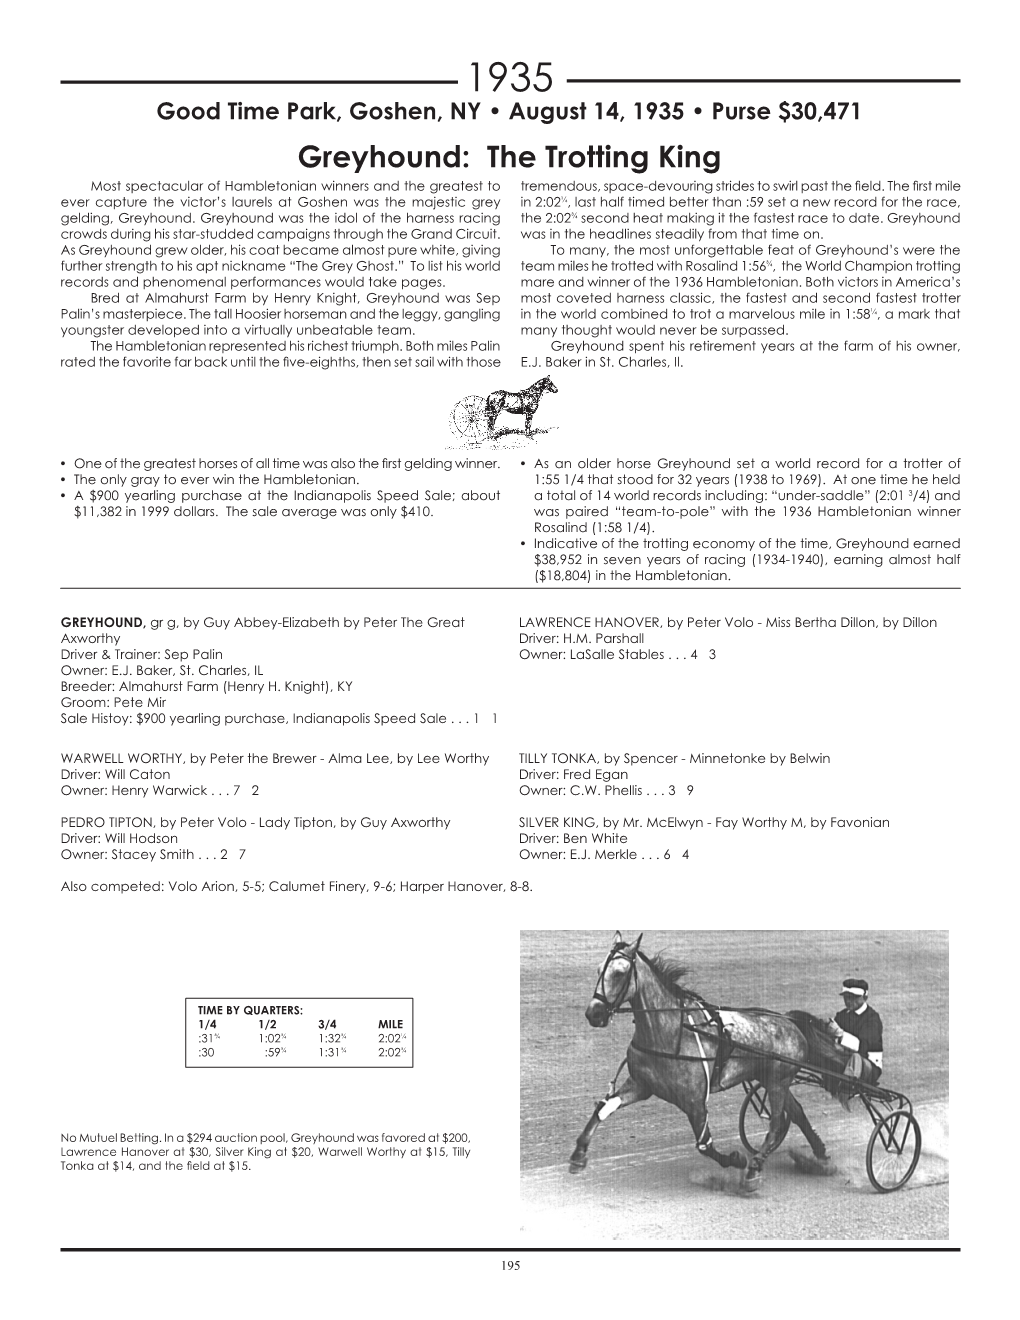 Greyhound: the Trotting King Most Spectacular of Hambletonian Winners and the Greatest to Tremendous, Space-Devouring Strides to Swirl Past the Field